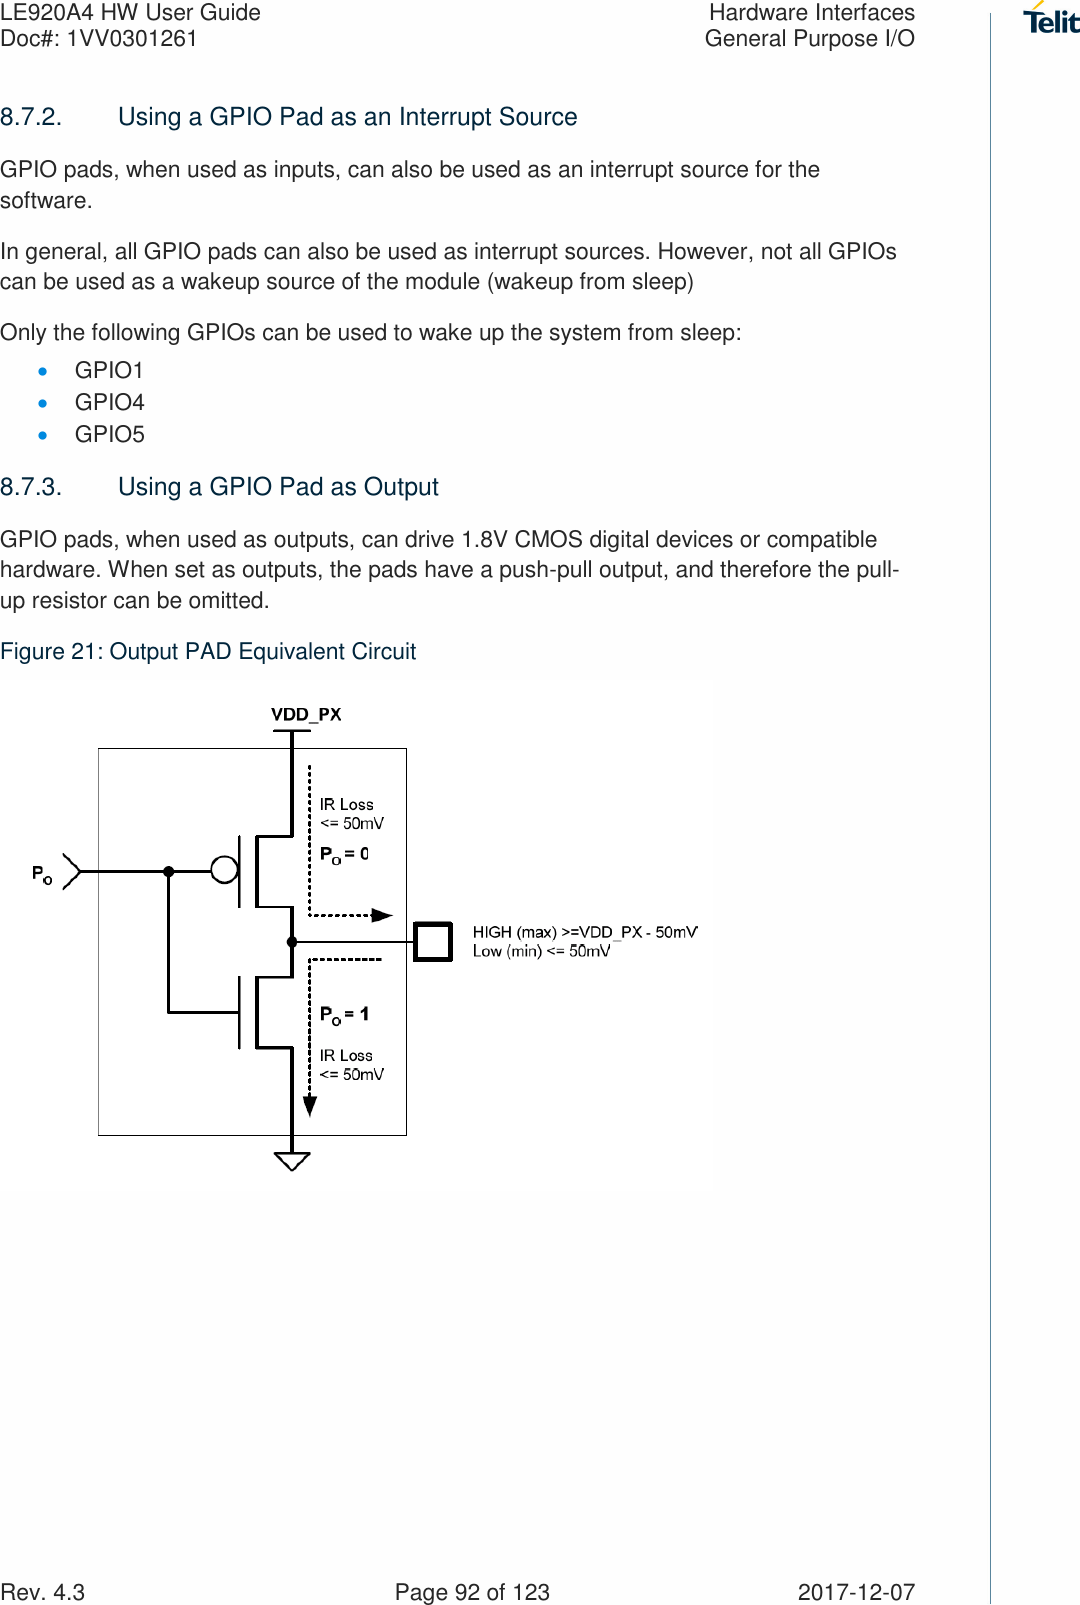 LE920A4 HW User Guide  Hardware Interfaces Doc#: 1VV0301261  General Purpose I/O Rev. 4.3    Page 92 of 123  2017-12-07 8.7.2.  Using a GPIO Pad as an Interrupt Source GPIO pads, when used as inputs, can also be used as an interrupt source for the software. In general, all GPIO pads can also be used as interrupt sources. However, not all GPIOs can be used as a wakeup source of the module (wakeup from sleep)  Only the following GPIOs can be used to wake up the system from sleep: • GPIO1 • GPIO4 • GPIO5 8.7.3.  Using a GPIO Pad as Output GPIO pads, when used as outputs, can drive 1.8V CMOS digital devices or compatible hardware. When set as outputs, the pads have a push-pull output, and therefore the pull-up resistor can be omitted. Figure 21: Output PAD Equivalent Circuit  